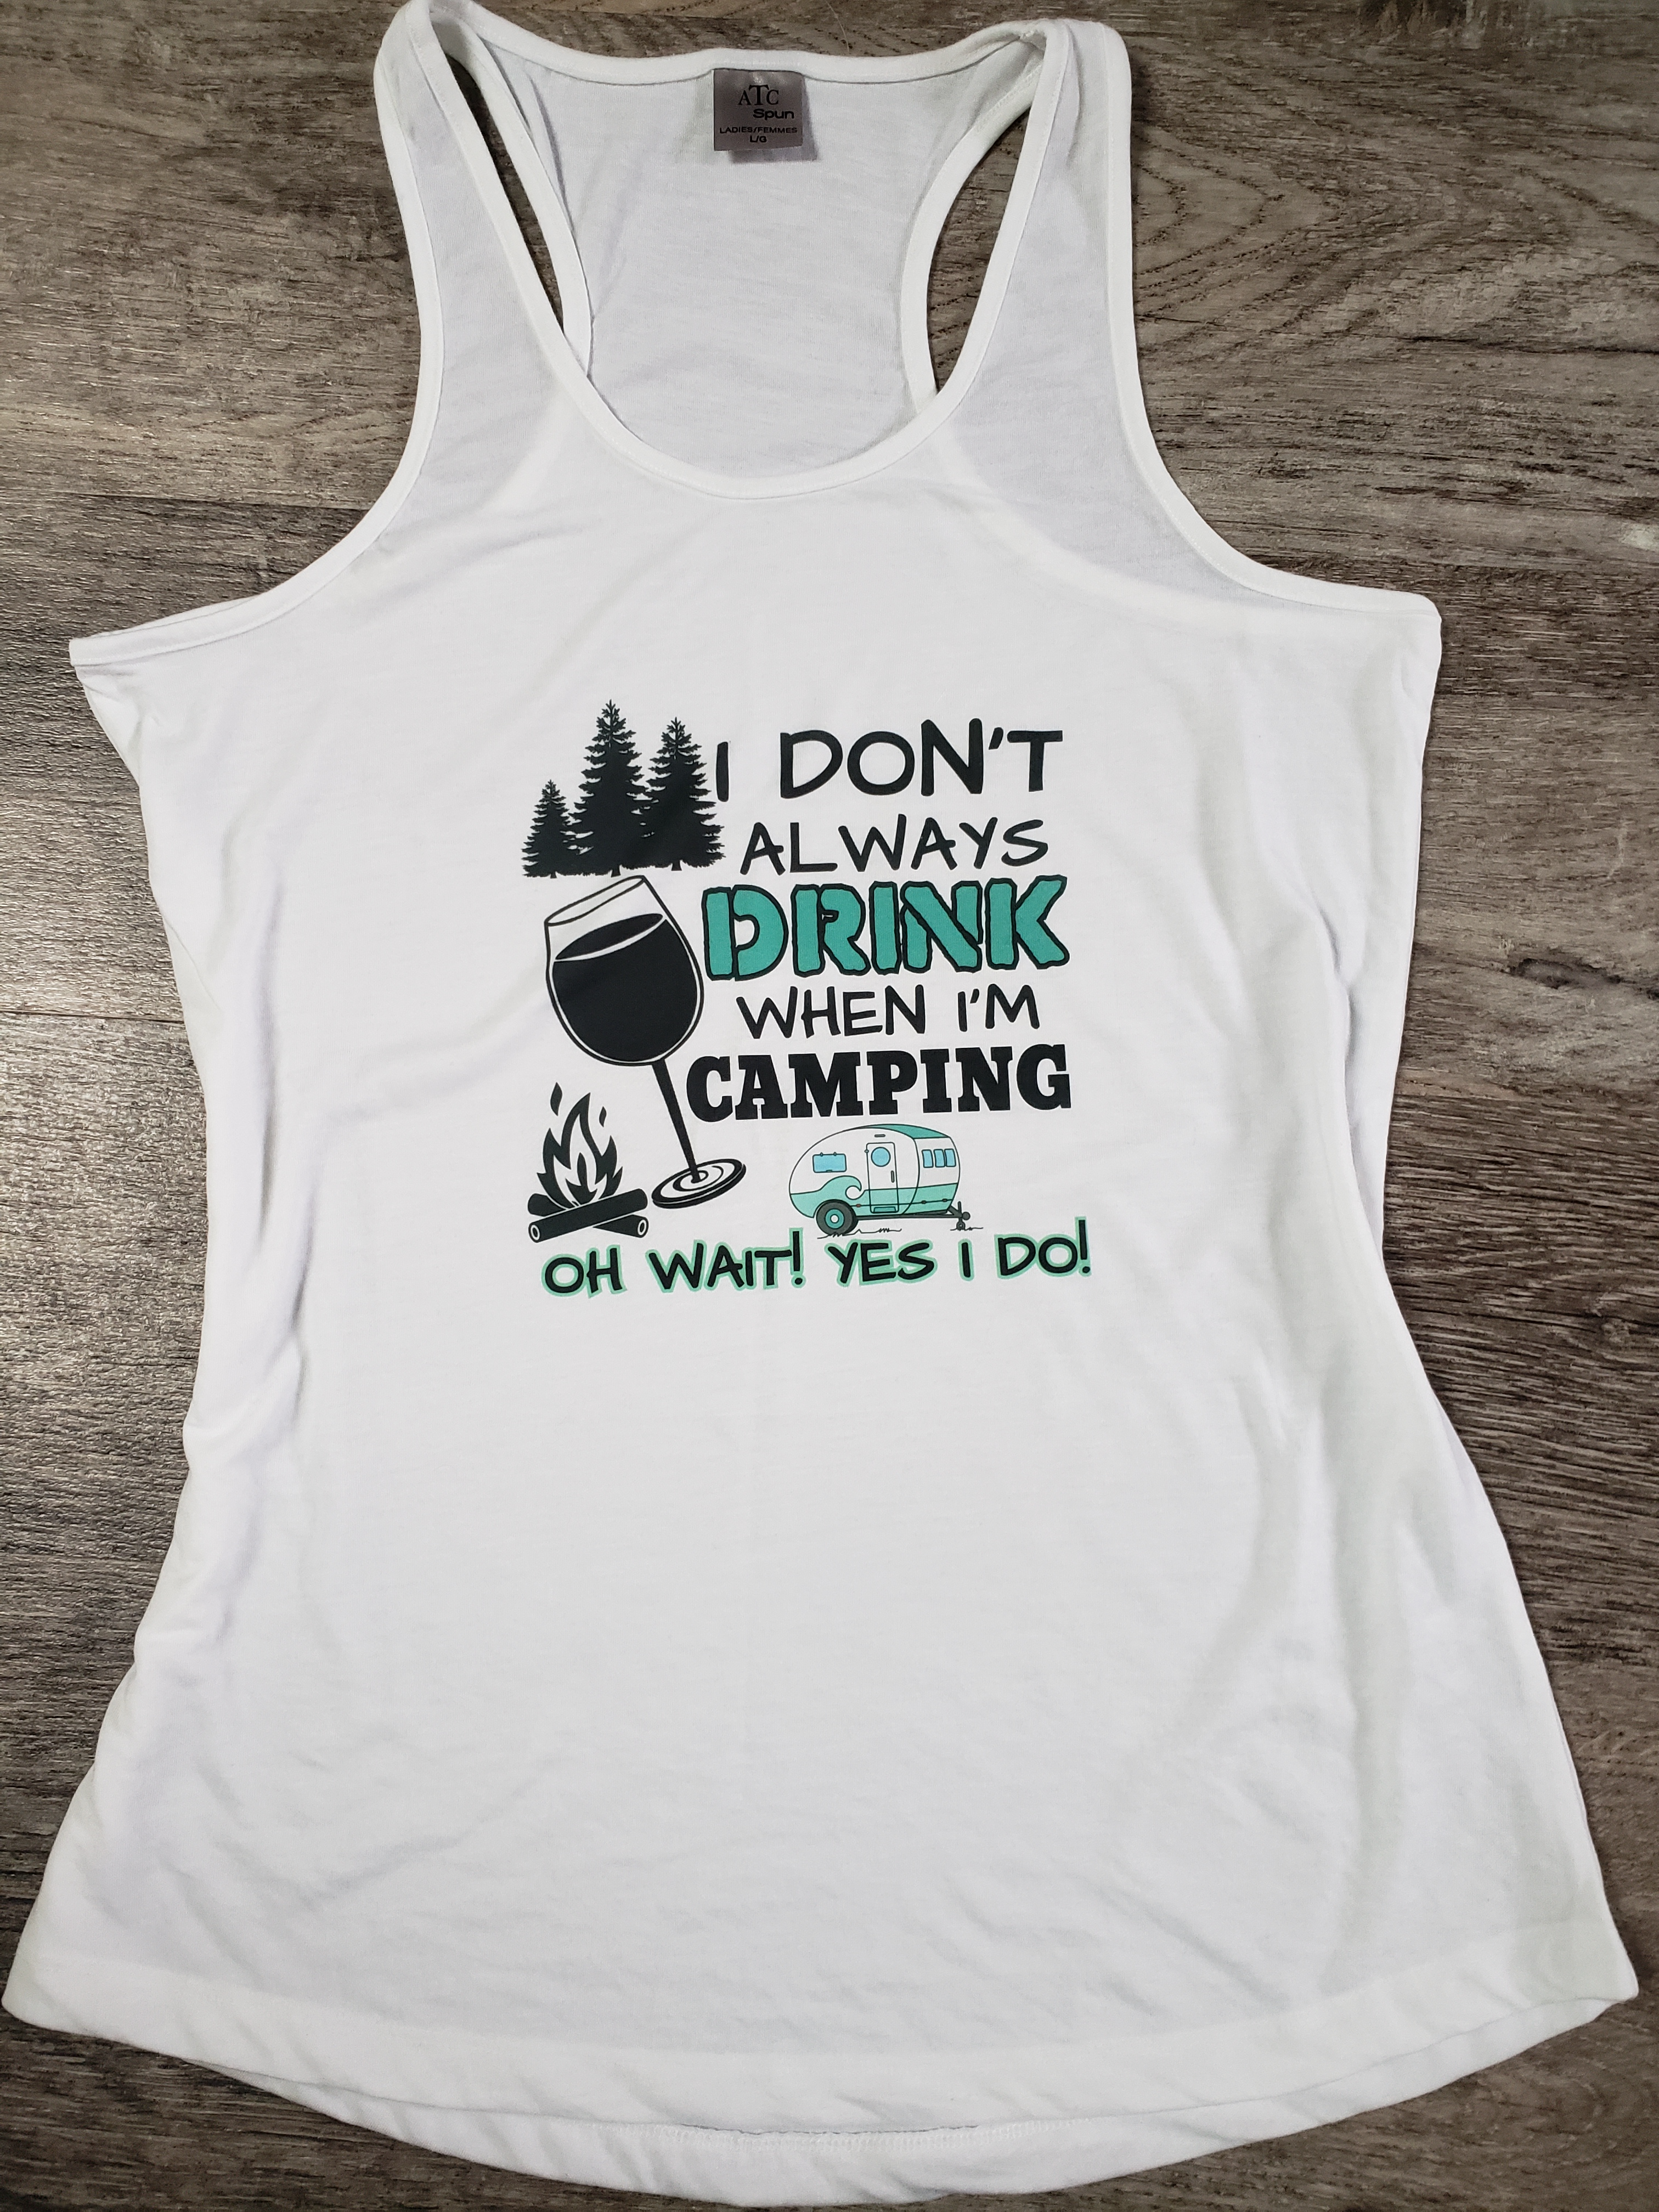 Ladies "I Don't Always Drink when I'm Camping" Tank top